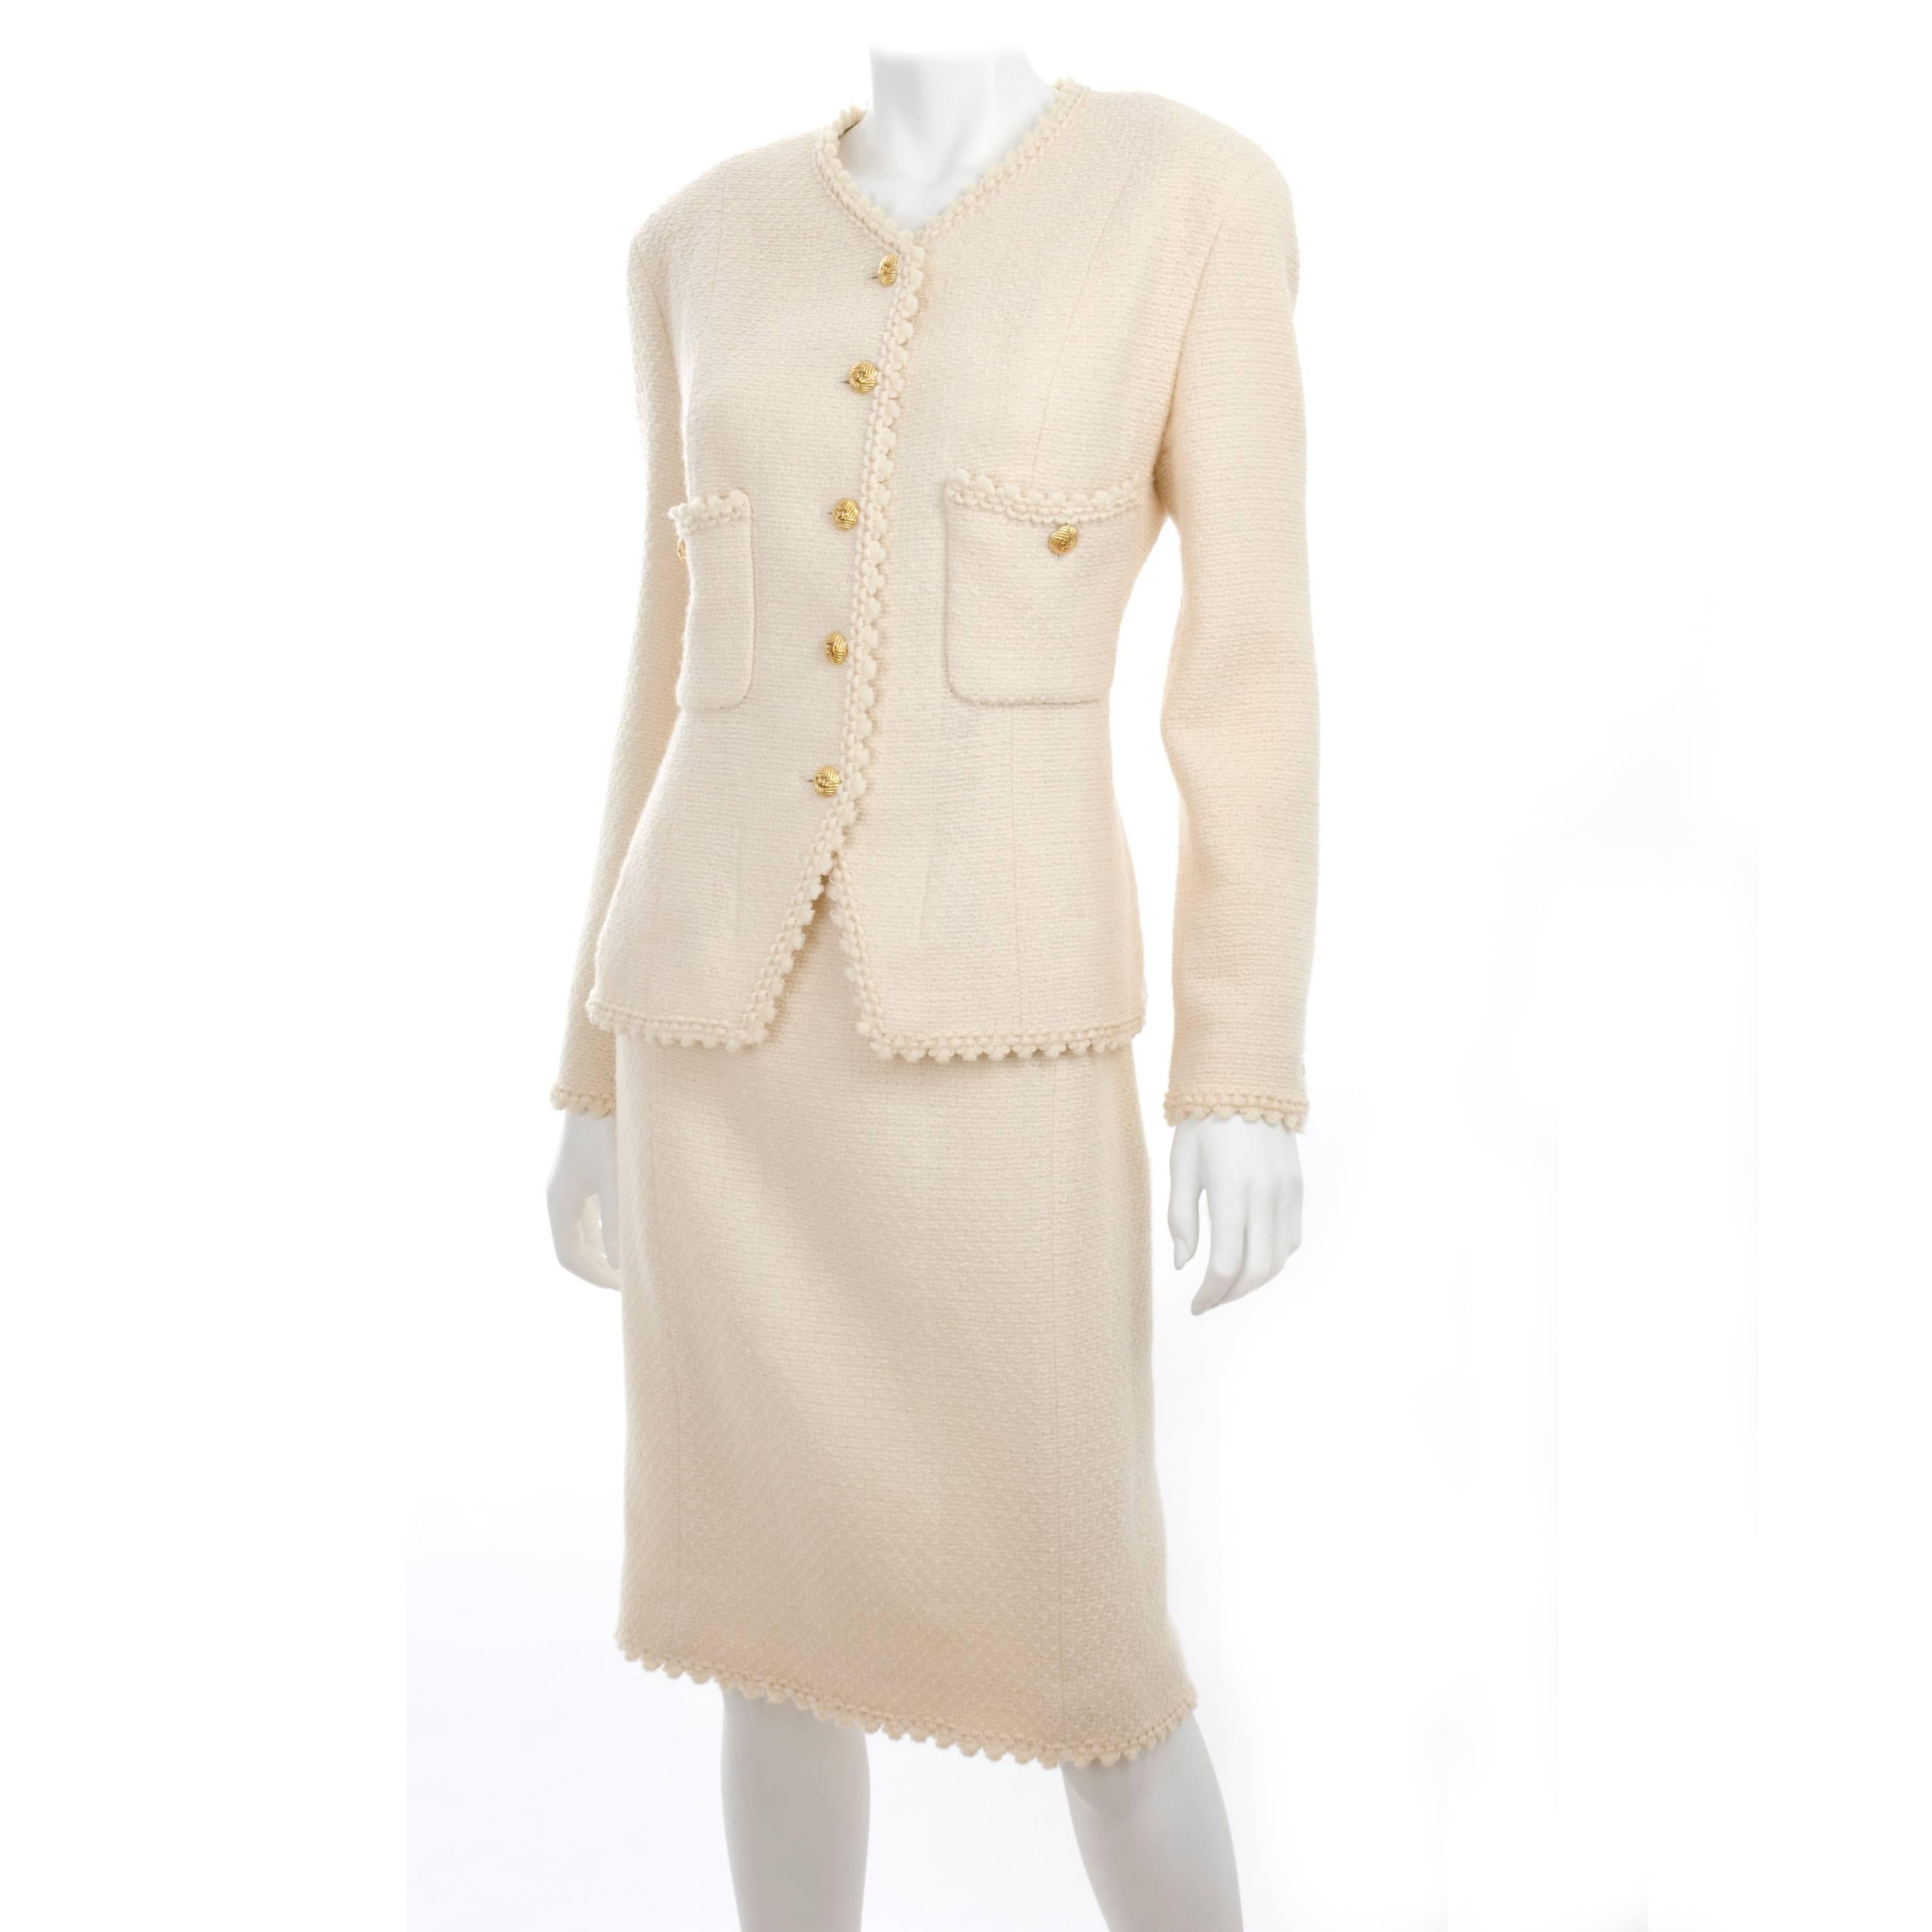 80's Vintage Chanel suit in creme with picot edge and CC logo gold buttons.
Fabric: wool and silk lining.
In excellent condition no stains or else and has been dry cleaned. Only the some of the buttons have a bid wear to the gold layer.
Size label